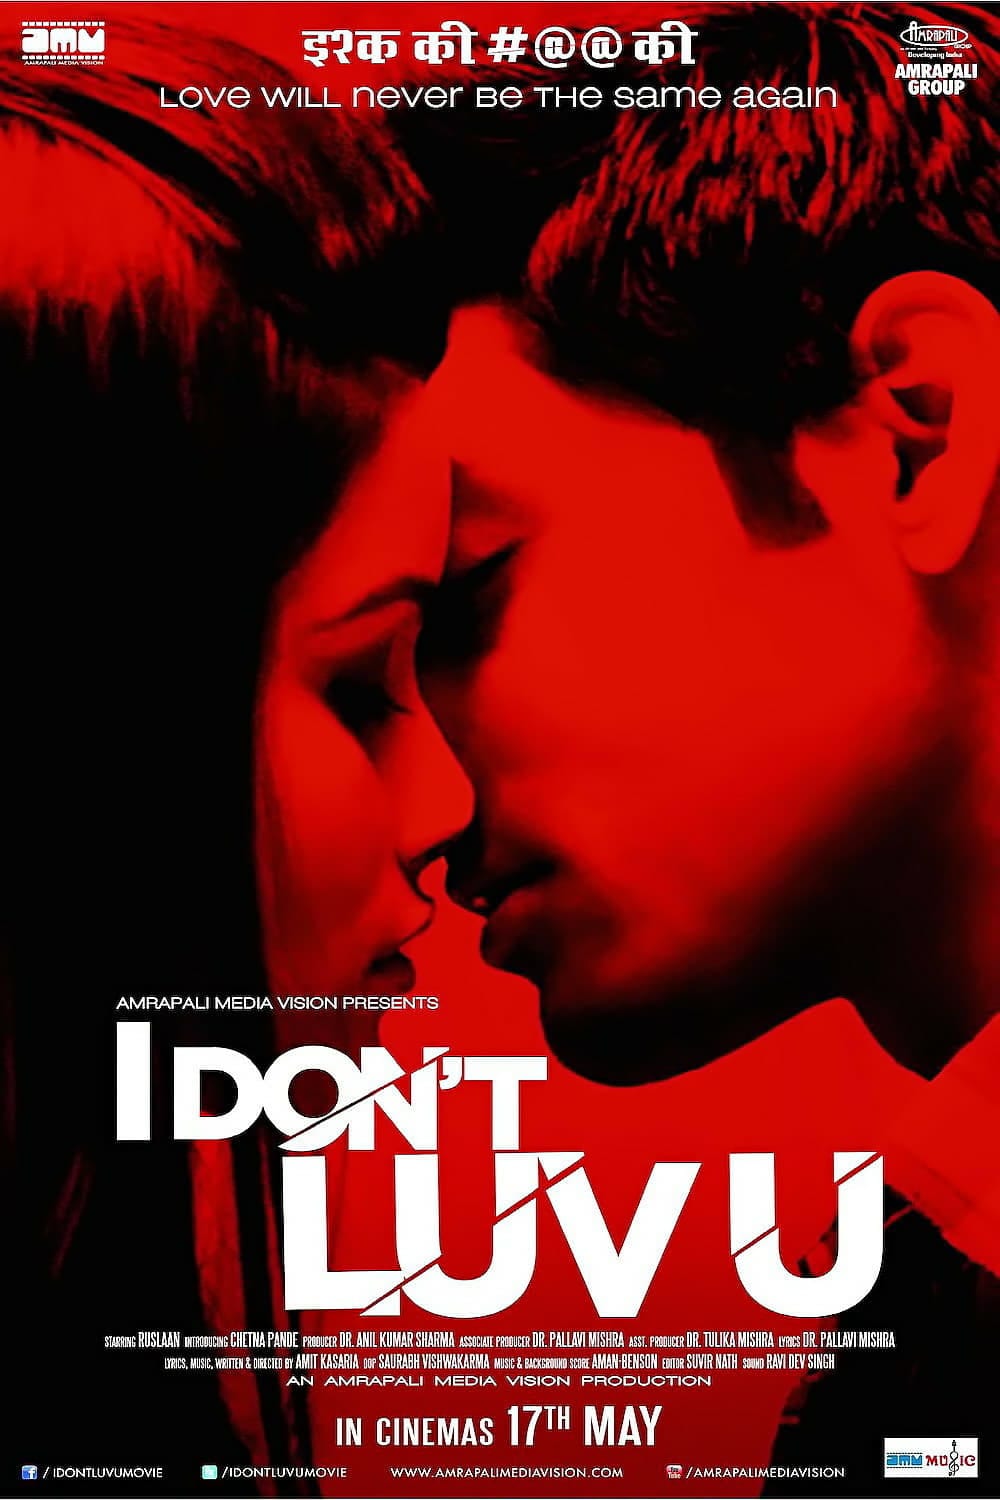 Poster for the movie "I Don't Luv U"